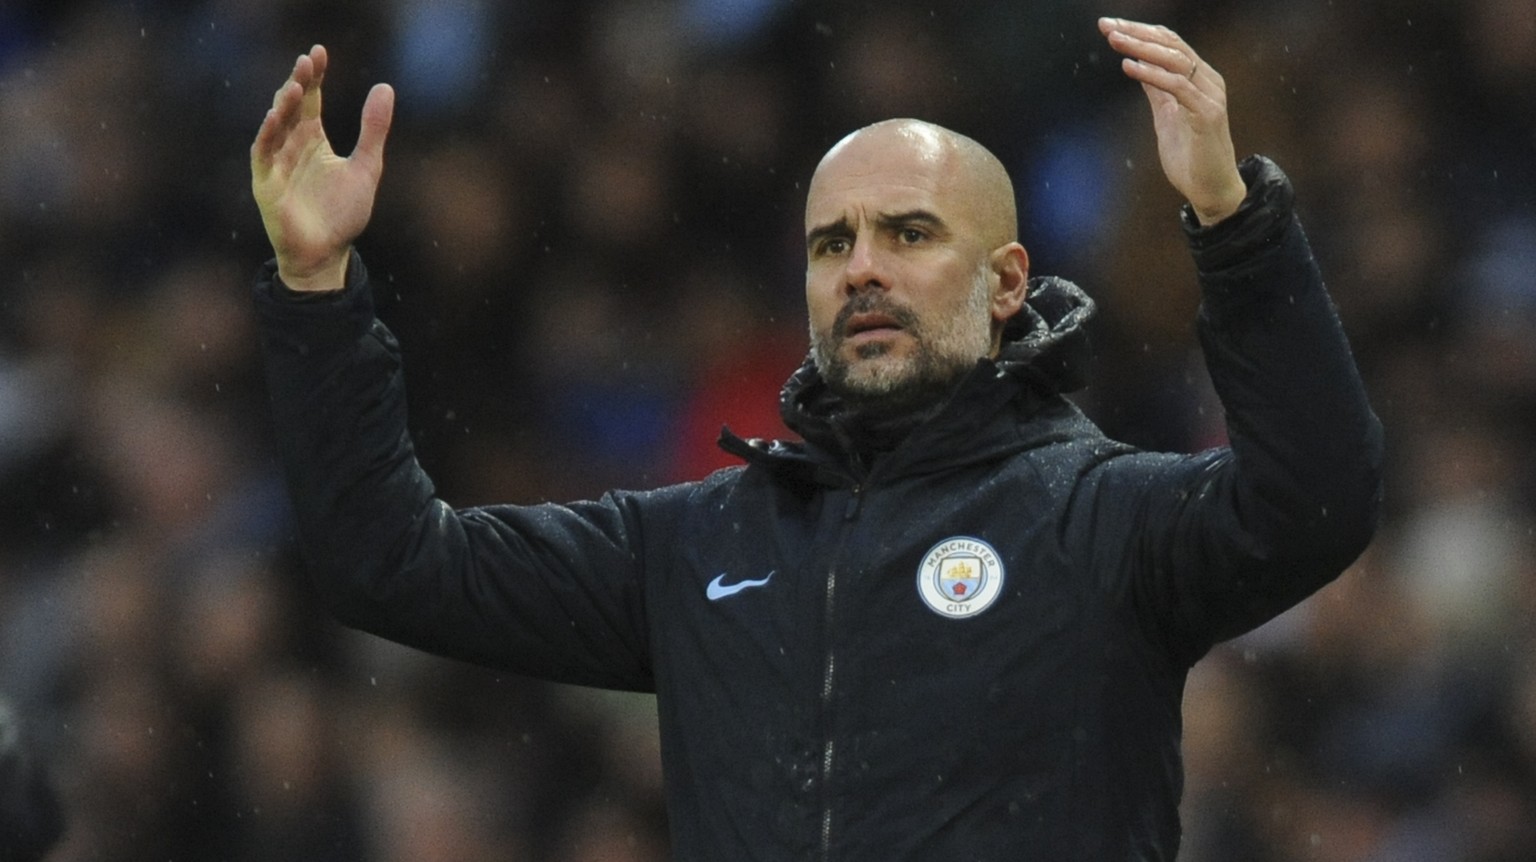 Manchester City manager Josep Guardiola reacts during the FA Cup 4th round soccer match between Manchester City and Burnley at Etihad stadium in Manchester, England, Saturday, Jan. 26, 2019. (AP Photo ...